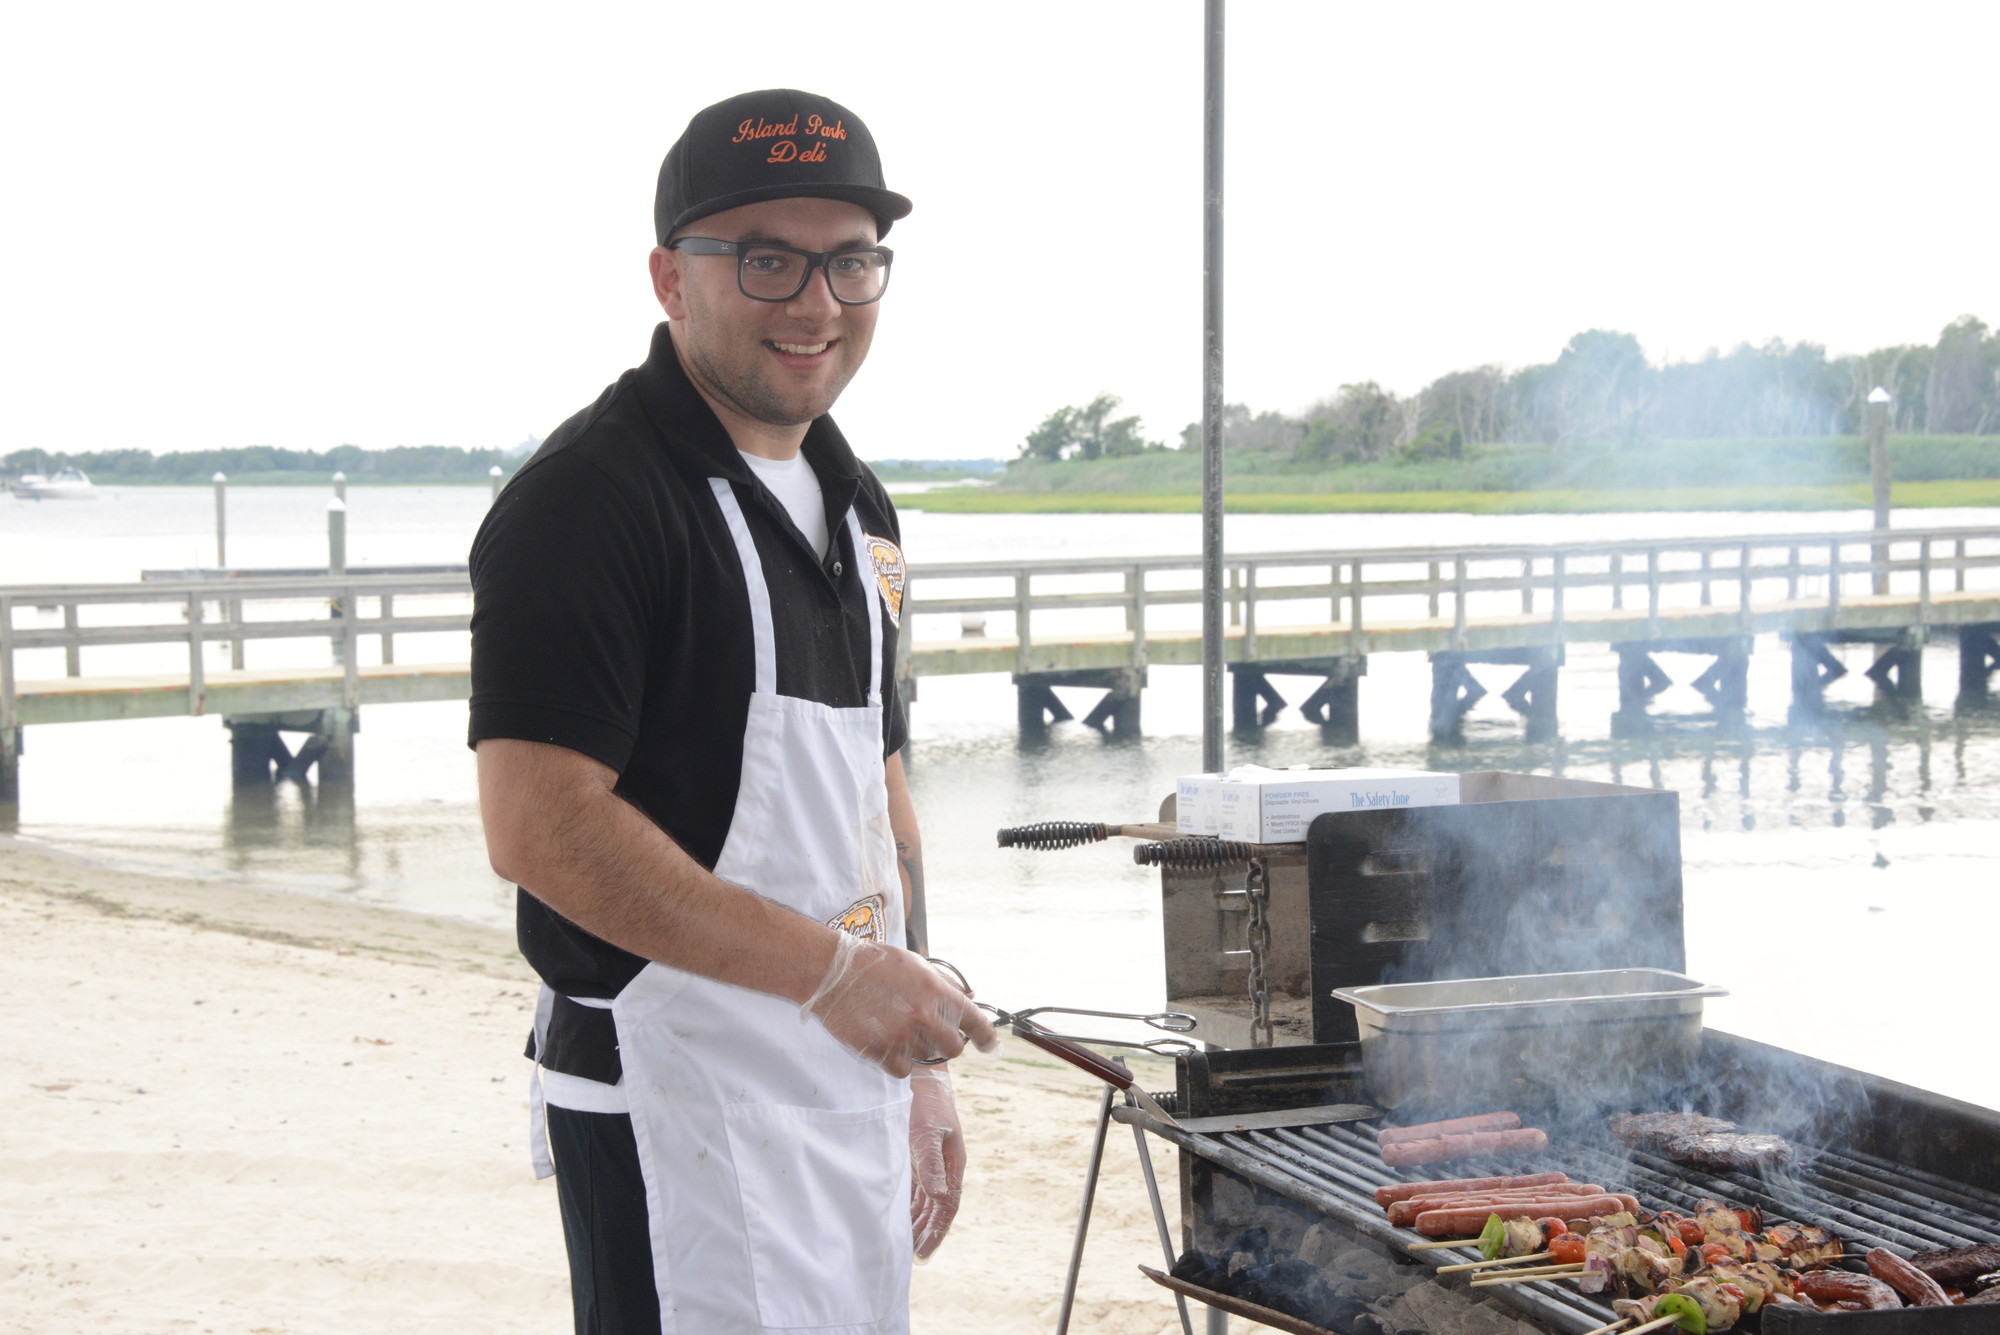 Lorenzo Rivera worked the grill at the Chamber’s Calypso Night.